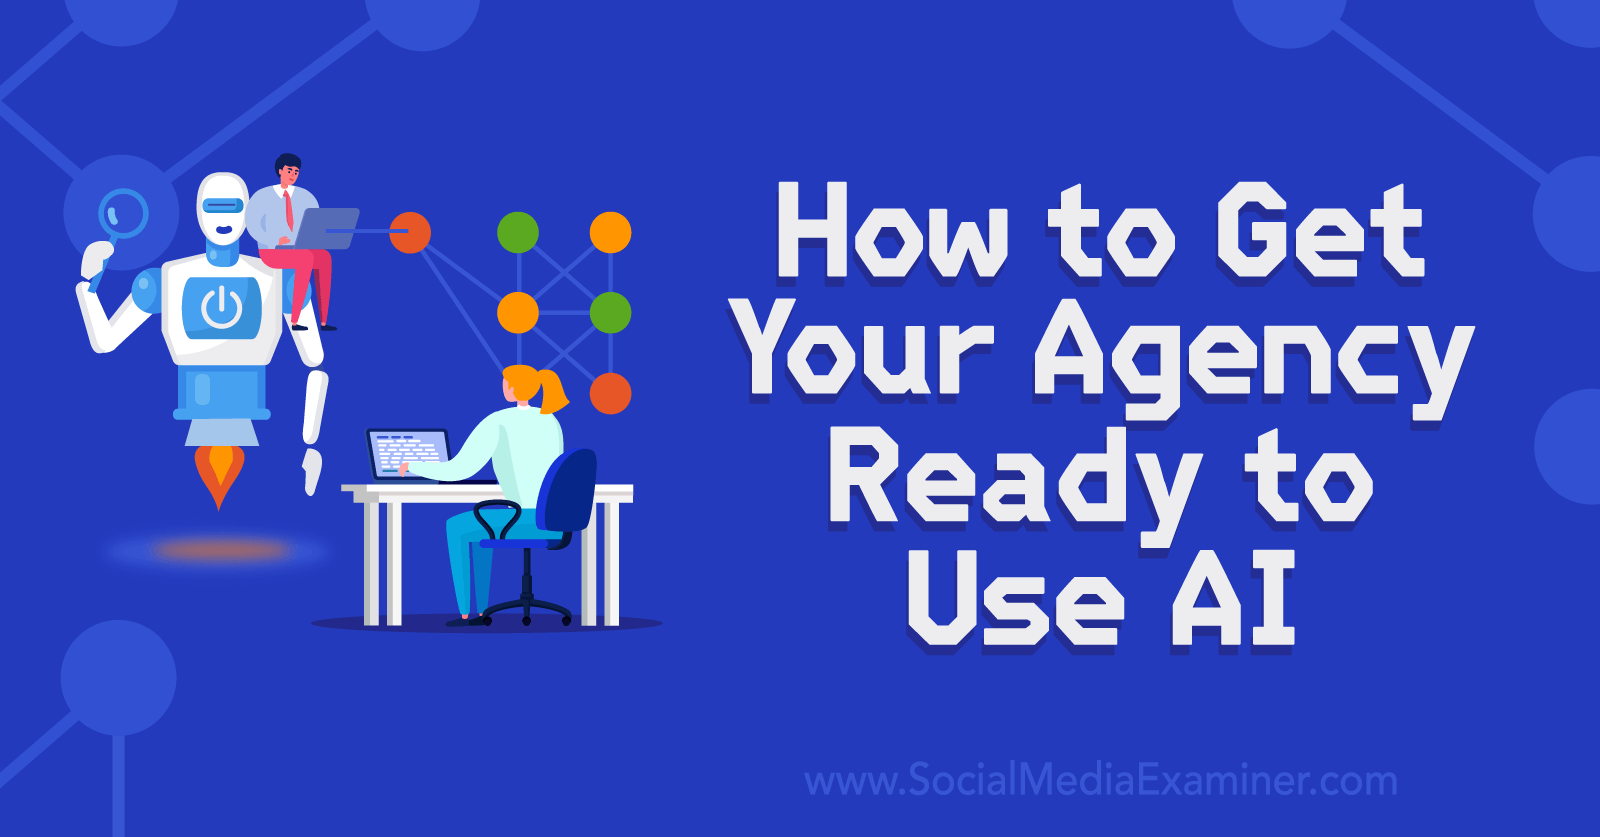 How to Get Your Agency Ready to Use AI by Social Media Examiner